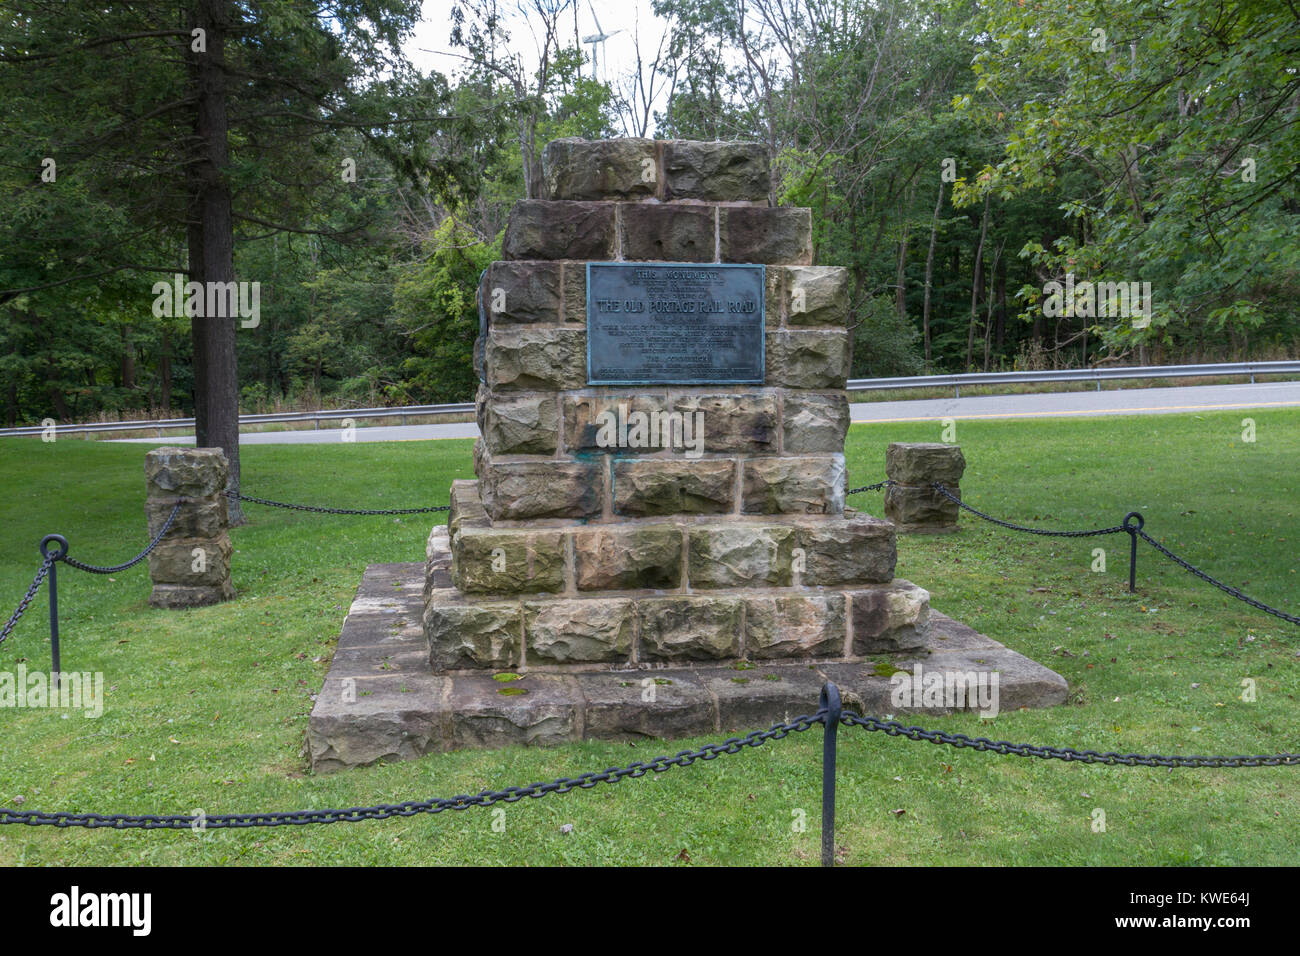 100th year Anniversary Memorial to the Allegheny Portage Railroad National Historic Site, Blair county, Pennsylvania, United States. Stock Photo